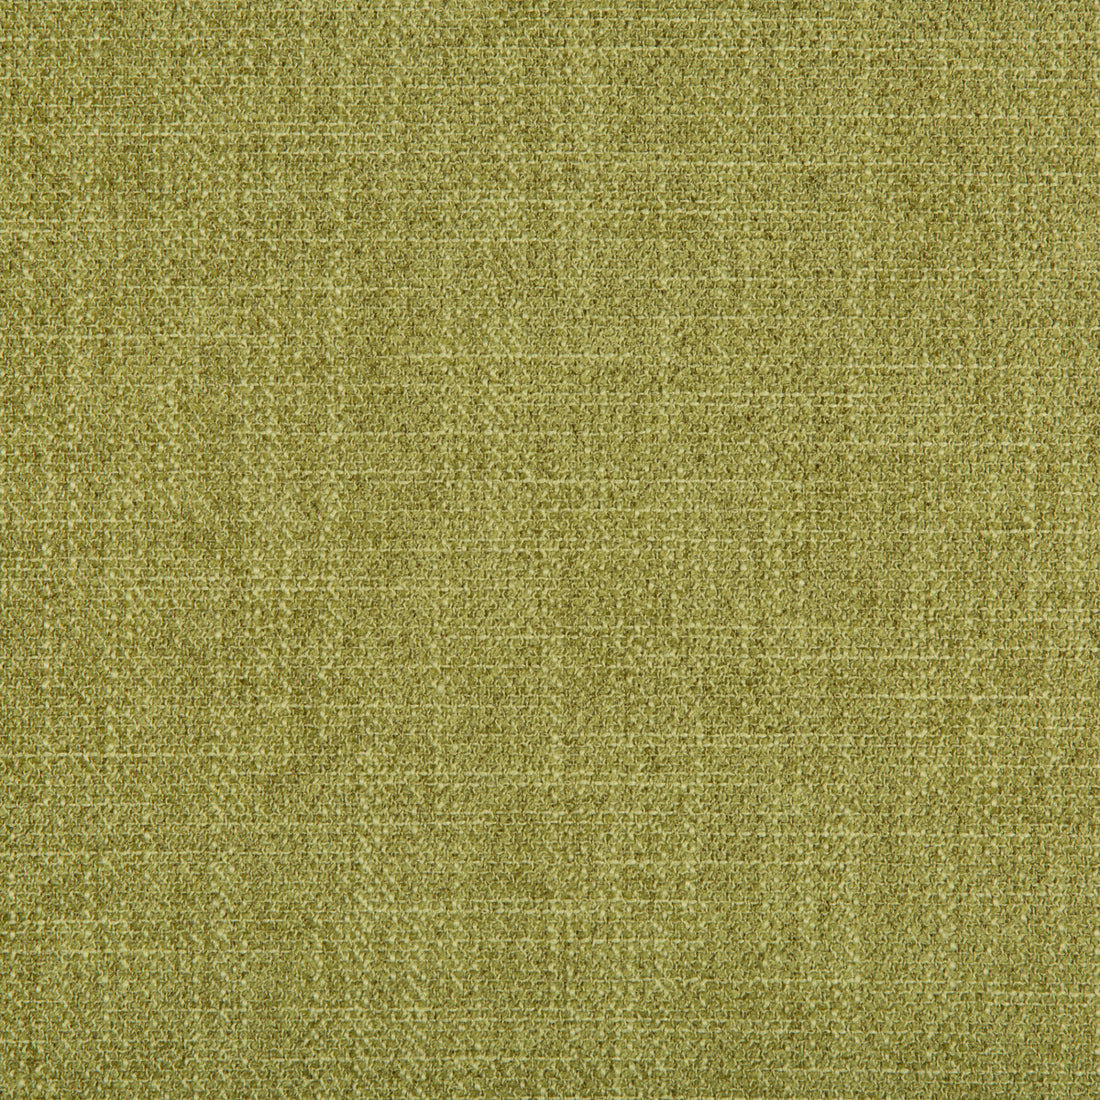 Kf Smt fabric - pattern 35390.13.0 - by Kravet Smart in the Performance Crypton Home collection